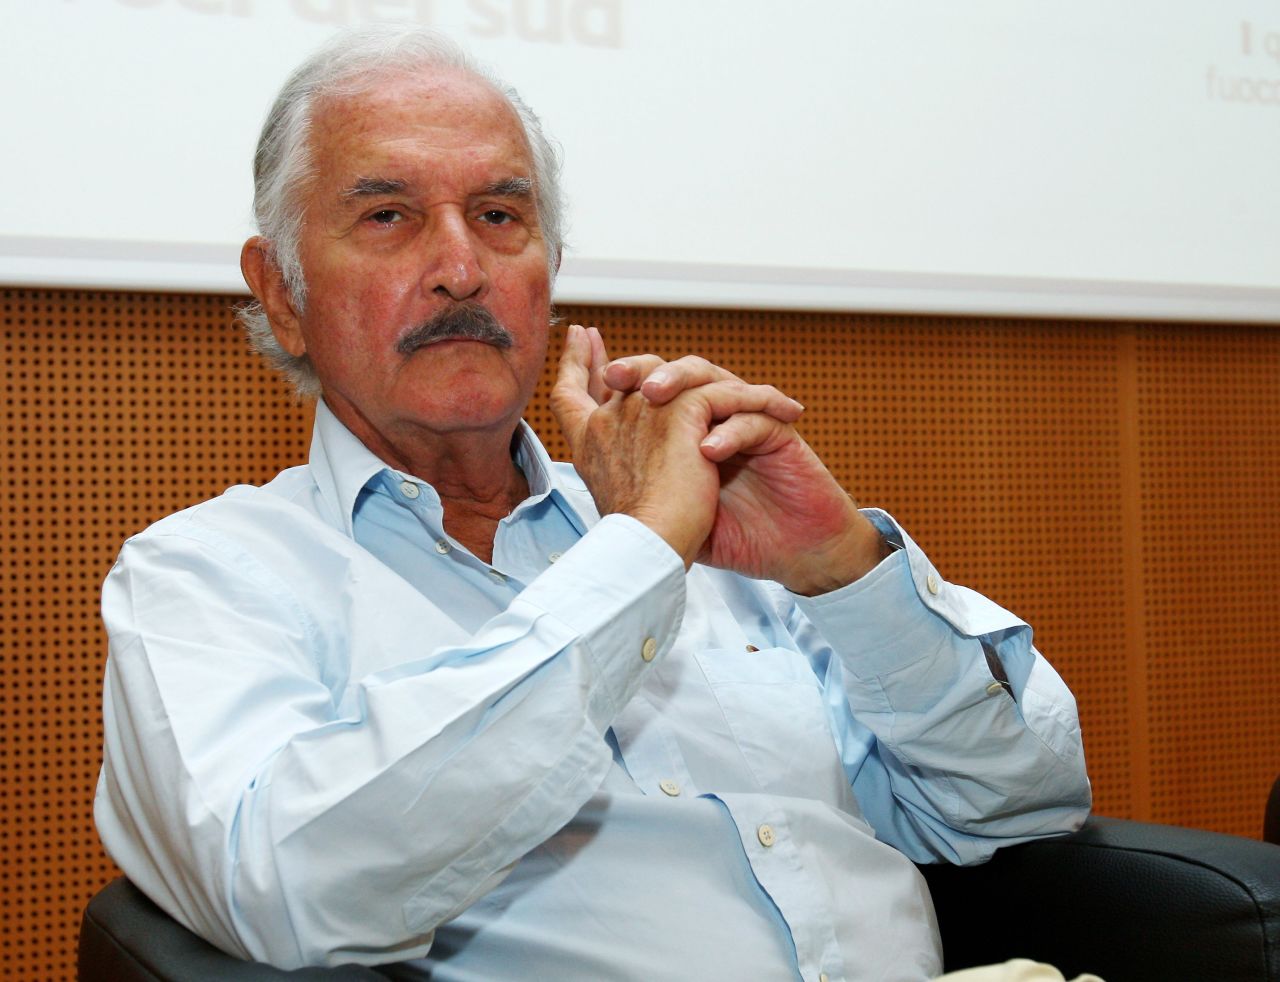 Mexican author <a href="http://www.cnn.com/2012/05/15/world/americas/mexico-fuentes/index.html">Carlos Fuentes</a> died on May 15 at the age of 83.